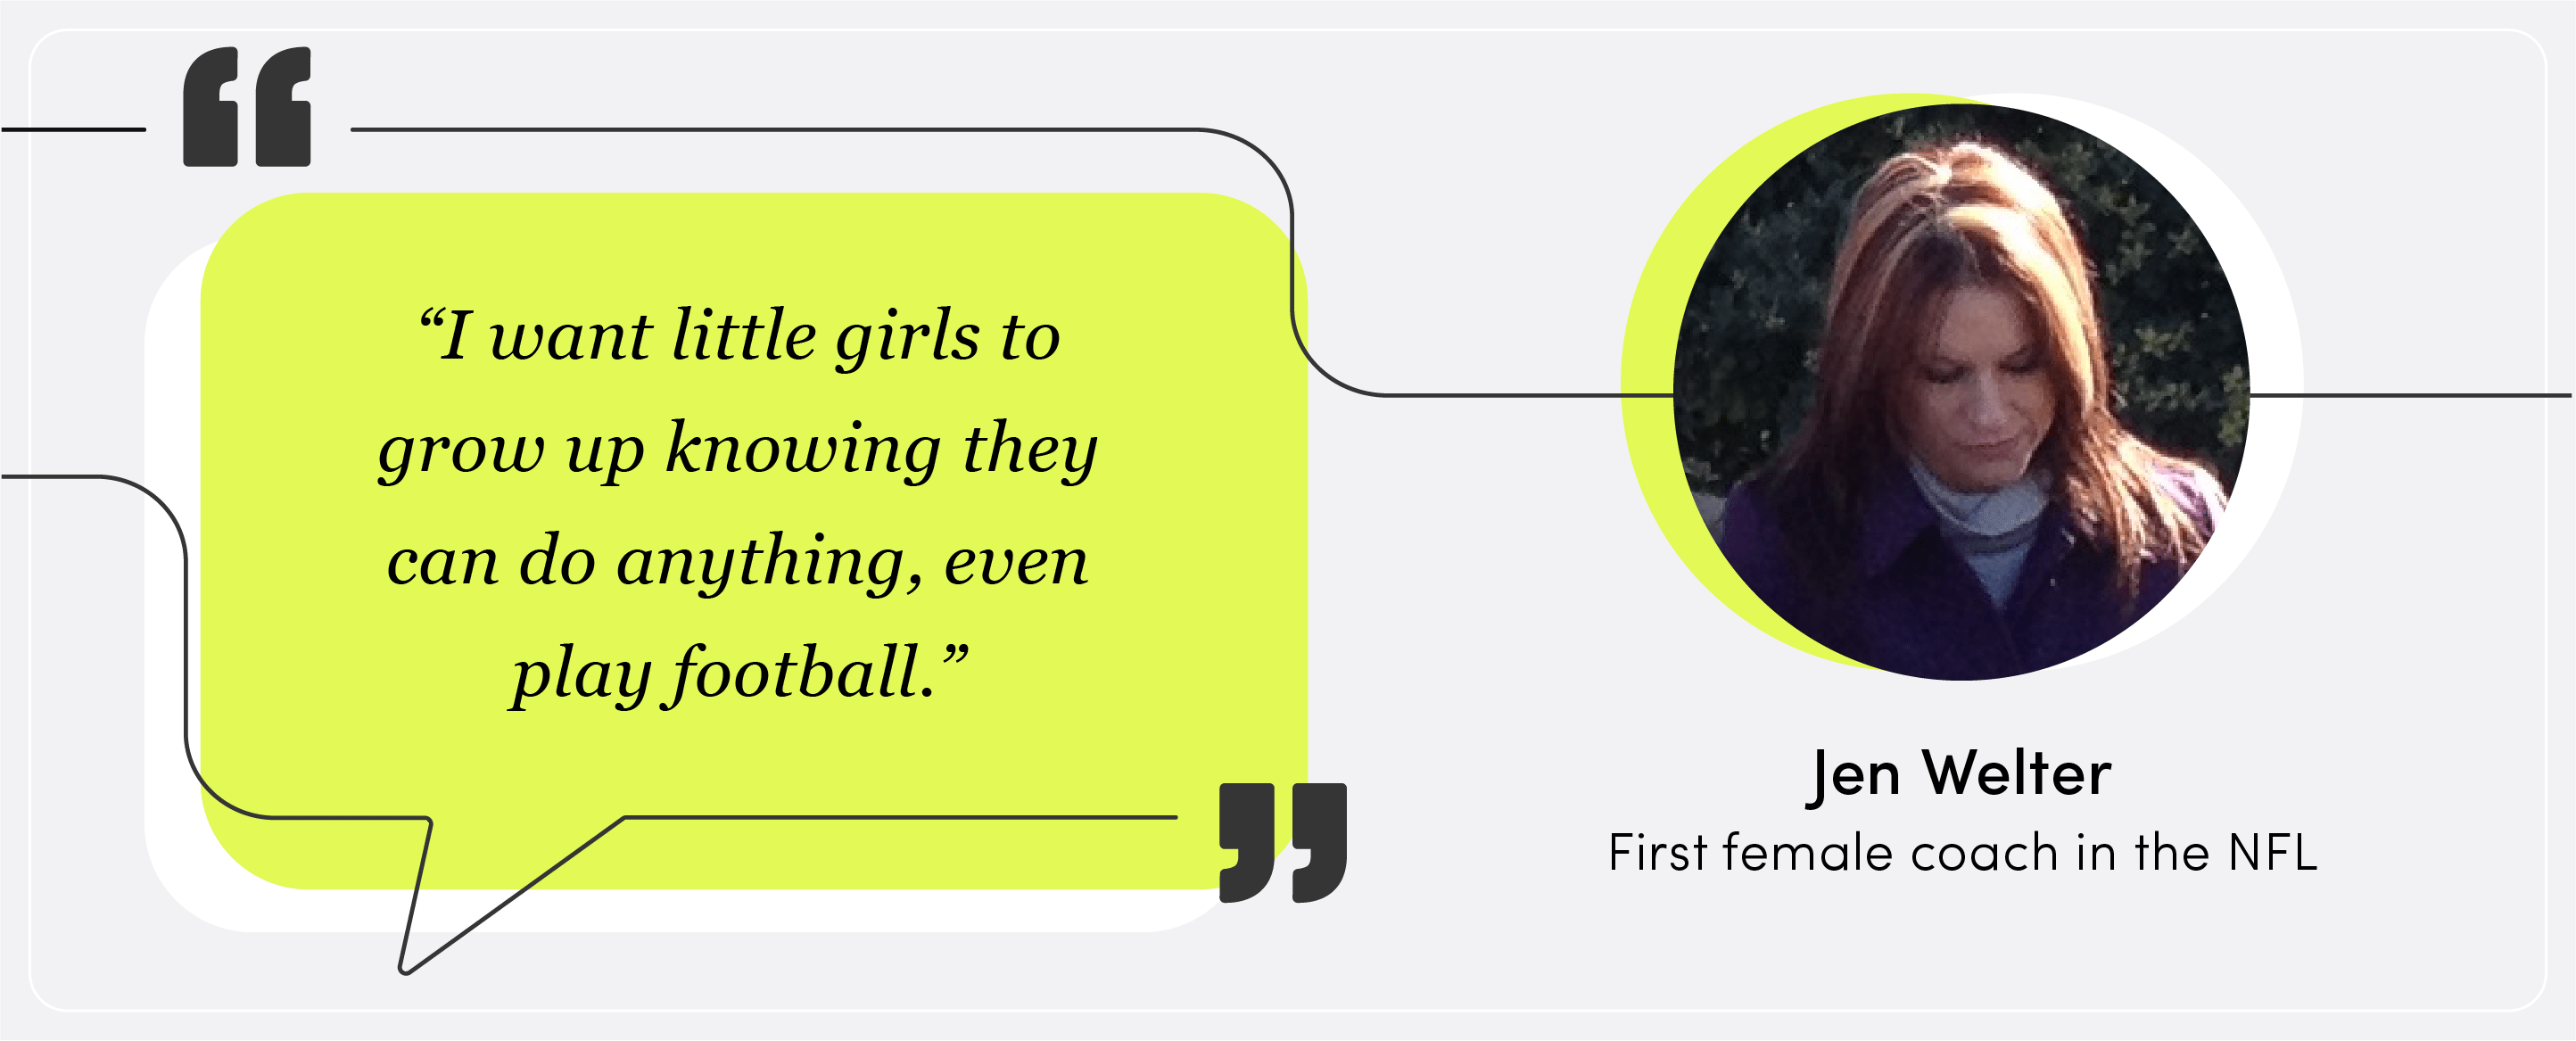 Jen Welter quote